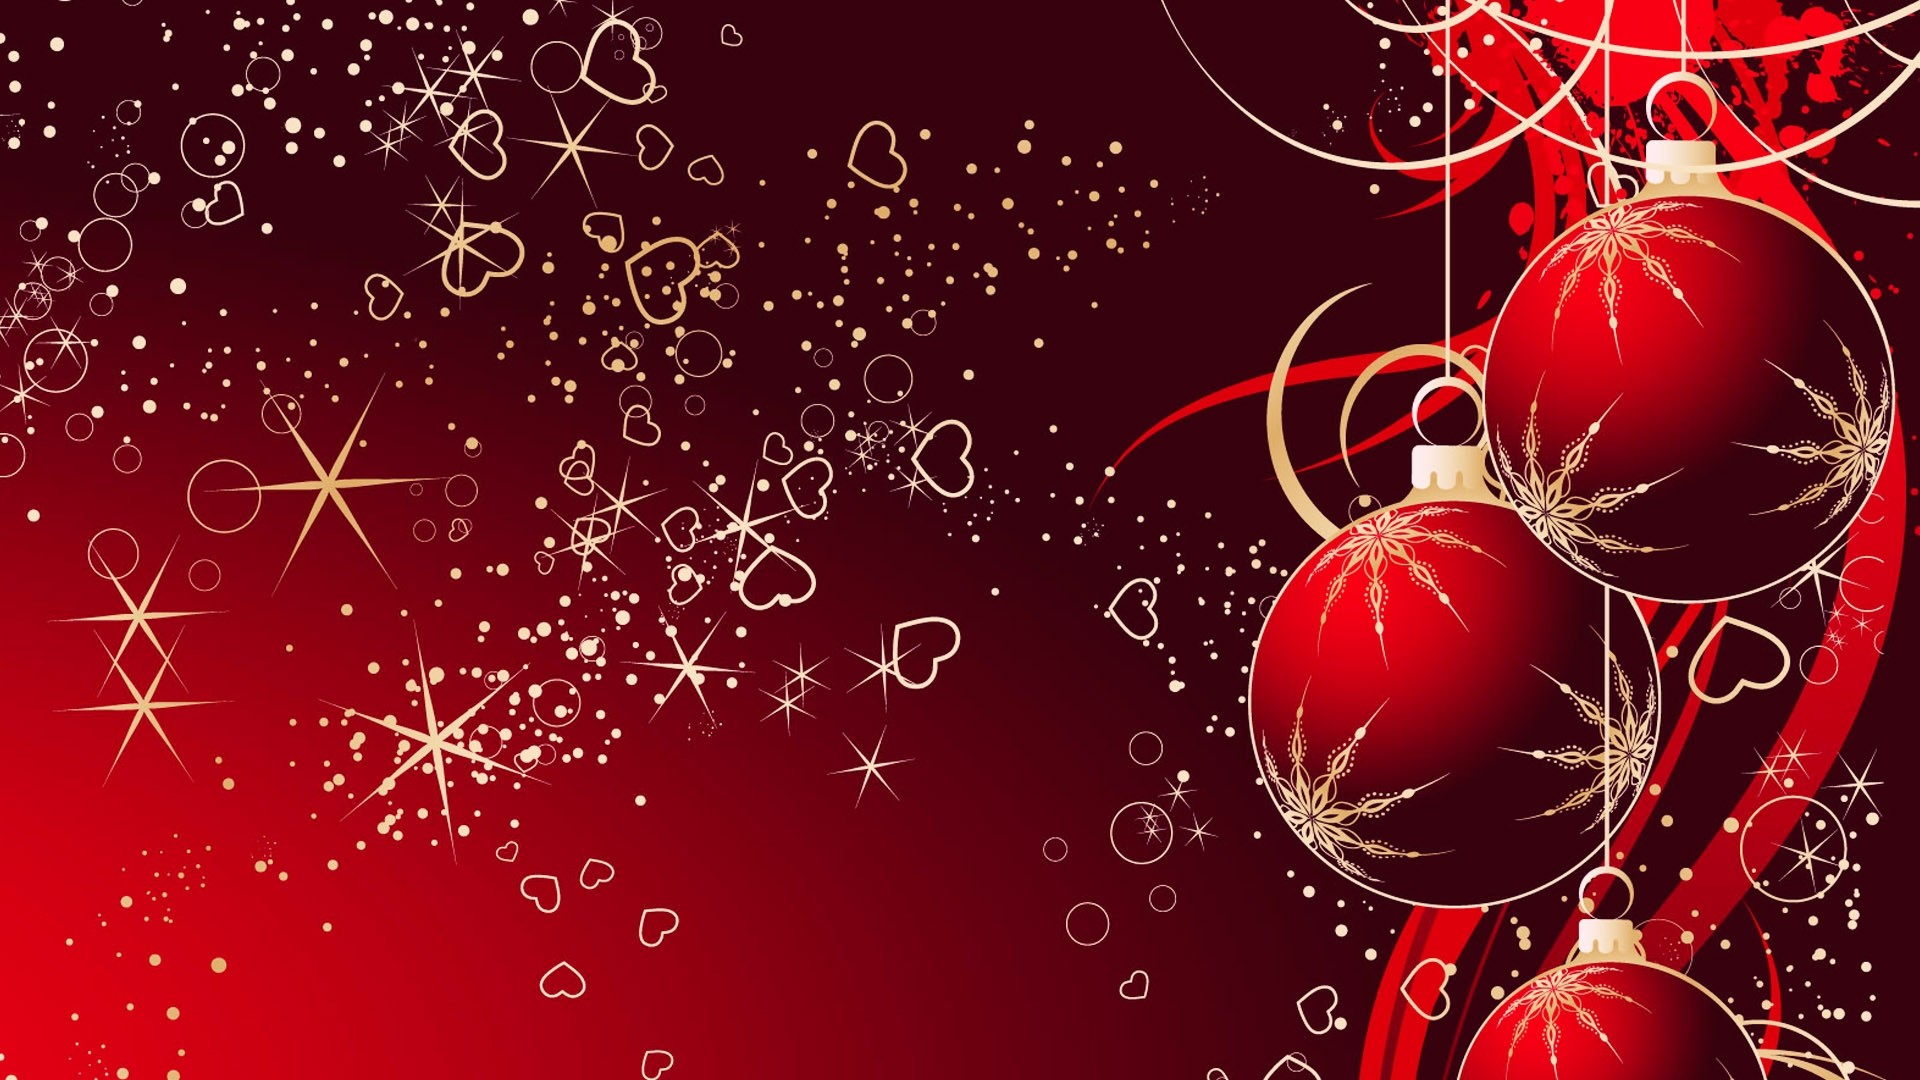 1920x1080 Red Christmas Wallpaper 6508